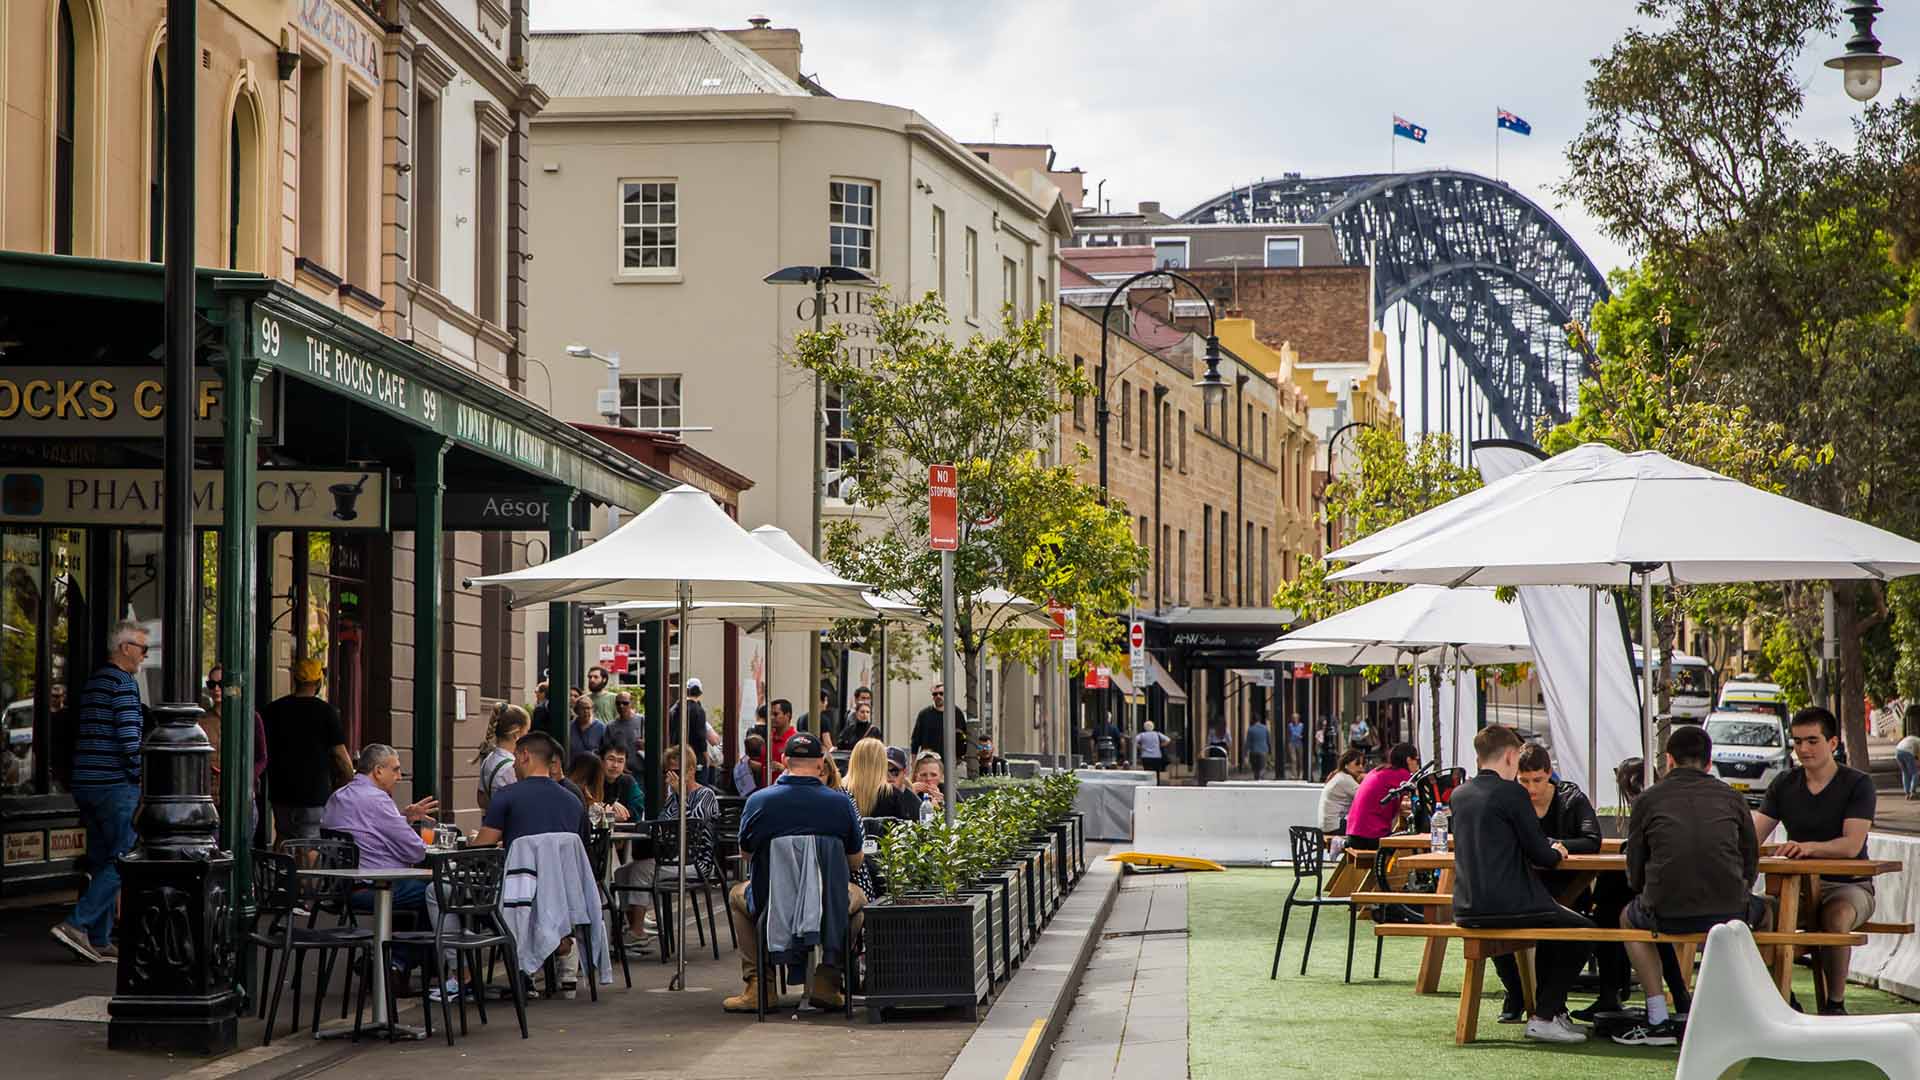 Messina for Breakfast and Outdoor Street Parties: Six Ways to Experience The Rocks This Summer